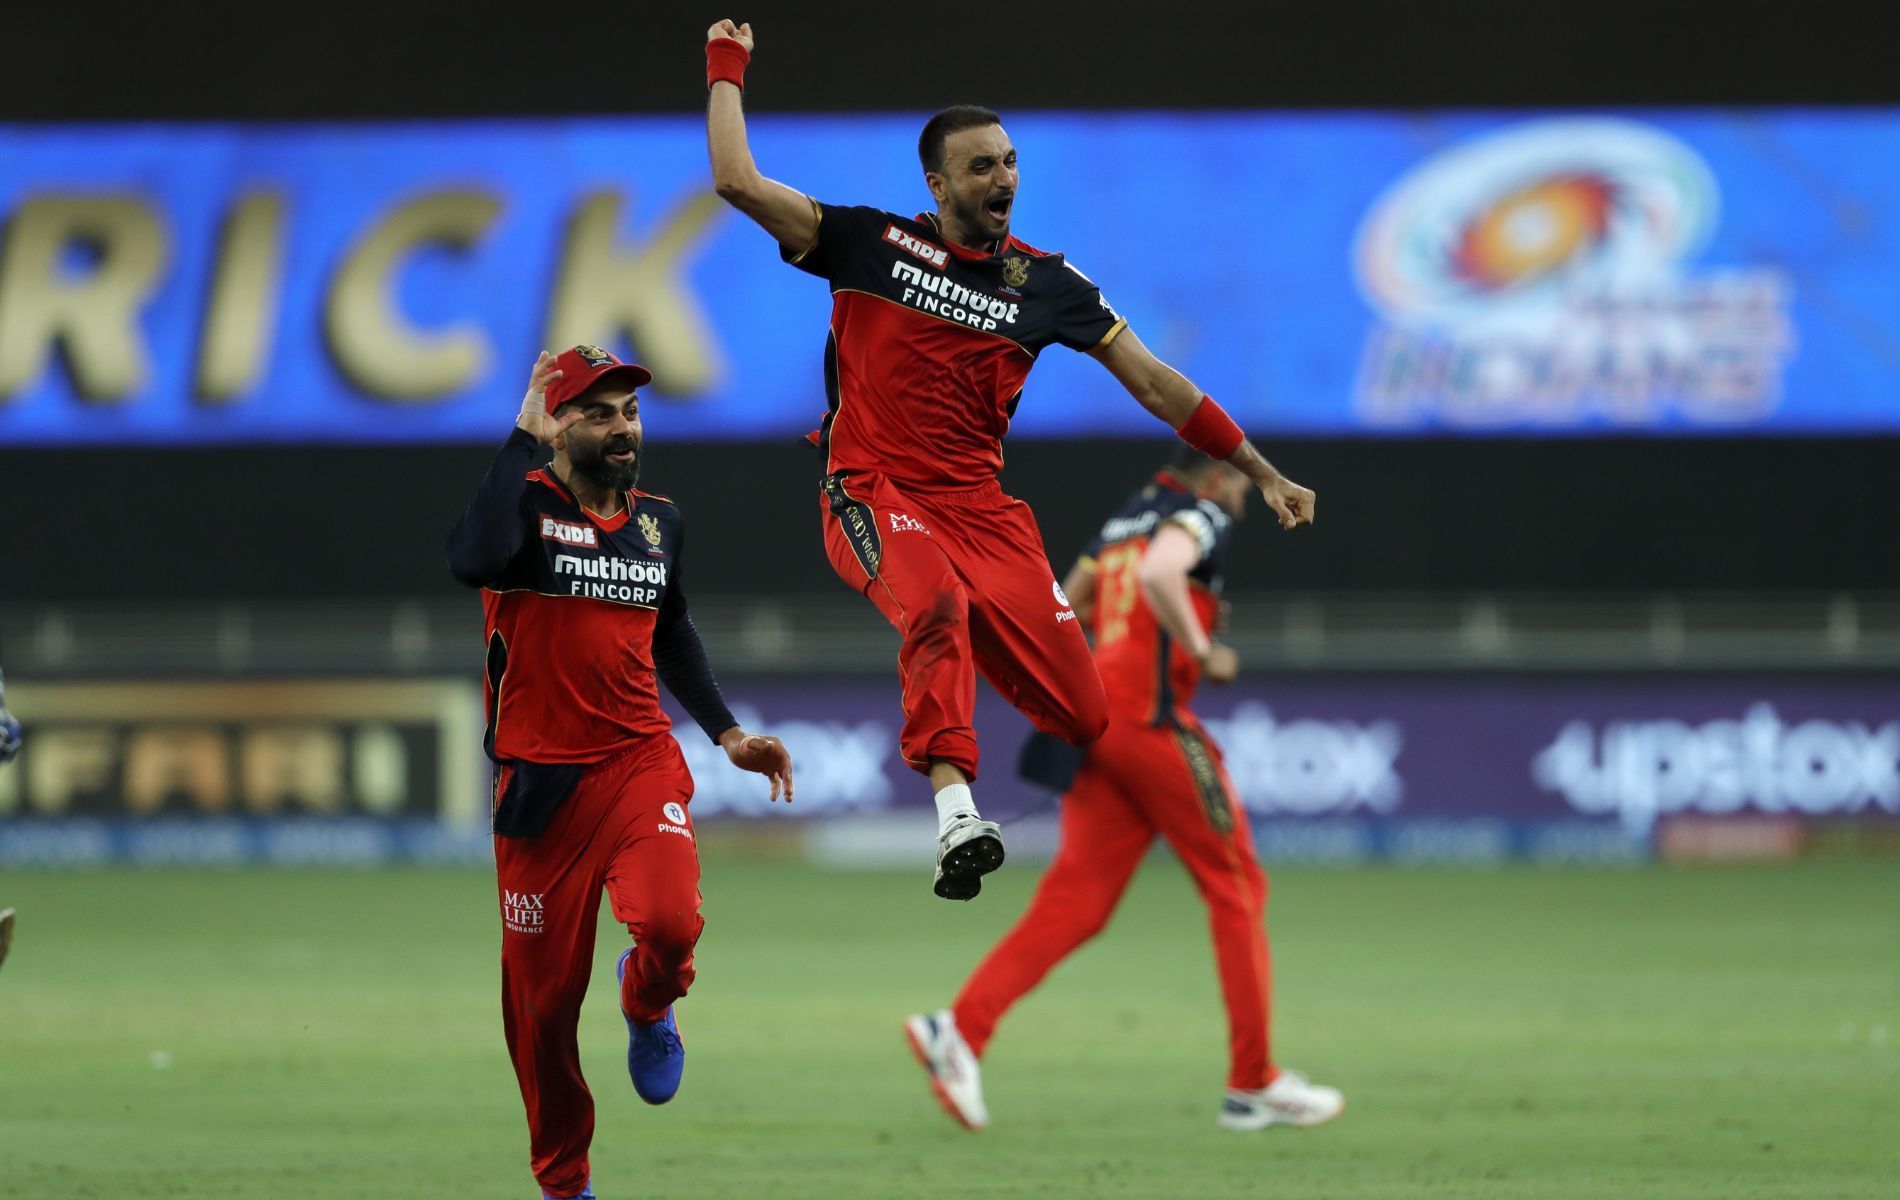 Harshal Patel had an excellent season for RCB in IPL 2021.